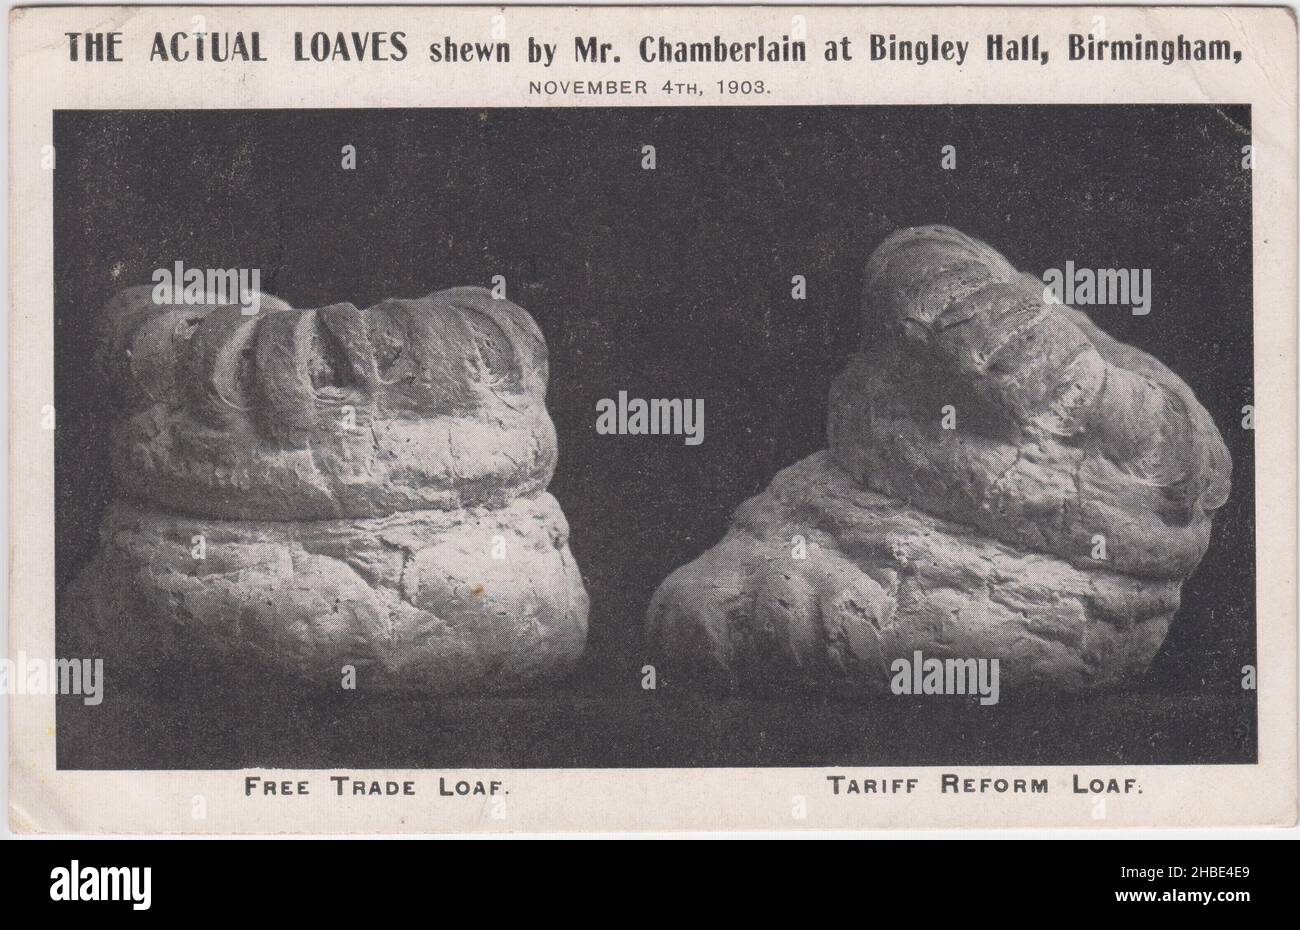 Photograph of two cottage loaf style loaves of bread. It refers to a stunt by politician Joseph Chamberlain at a 1903 political meeting at Bingley Hall, Birmingham - in response to an article in the pro-Liberal 'Daily News' which had stated that a 'tariff reform' loaf would be smaller due to increased costs of protectionism, Chamberlain displayed a 'tariff reform' & 'free trade' loaf & asked the audience if they could tell which was the smaller. Chamberlain & the loaves became part of the iconography of the tariff reform campaign & addressed concern over food prices & cost of living Stock Photo